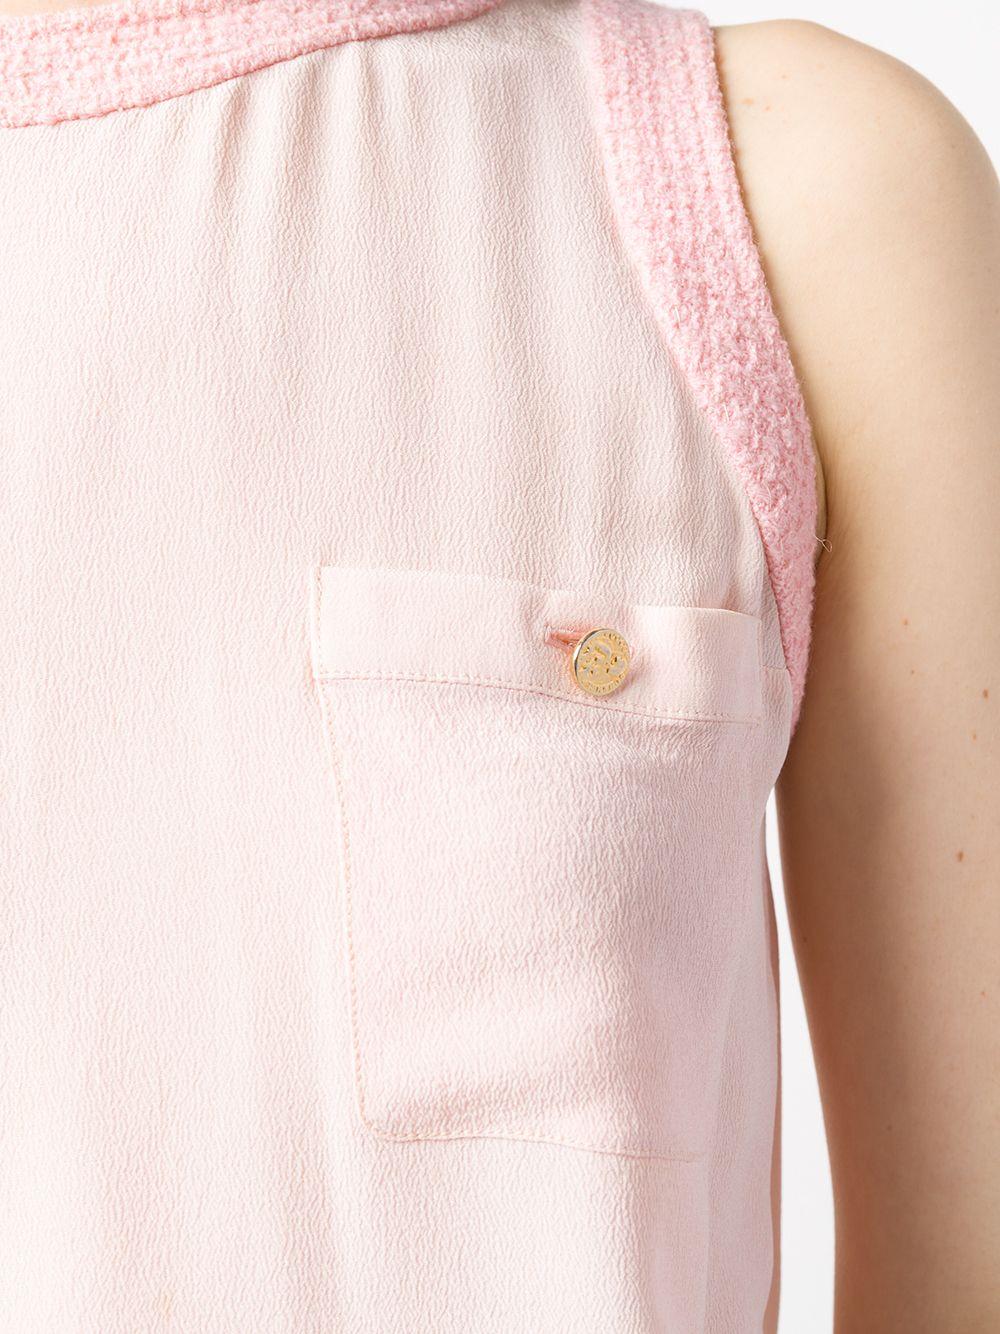 Expertly crafted in France from pure powder pink silk, this classic, pre-owned blouse perpetuates Chanel's finesse with a sleeveless design, a fluid style and bold, textured tweed framing the round-neck and underarms. The straight hem and two chest